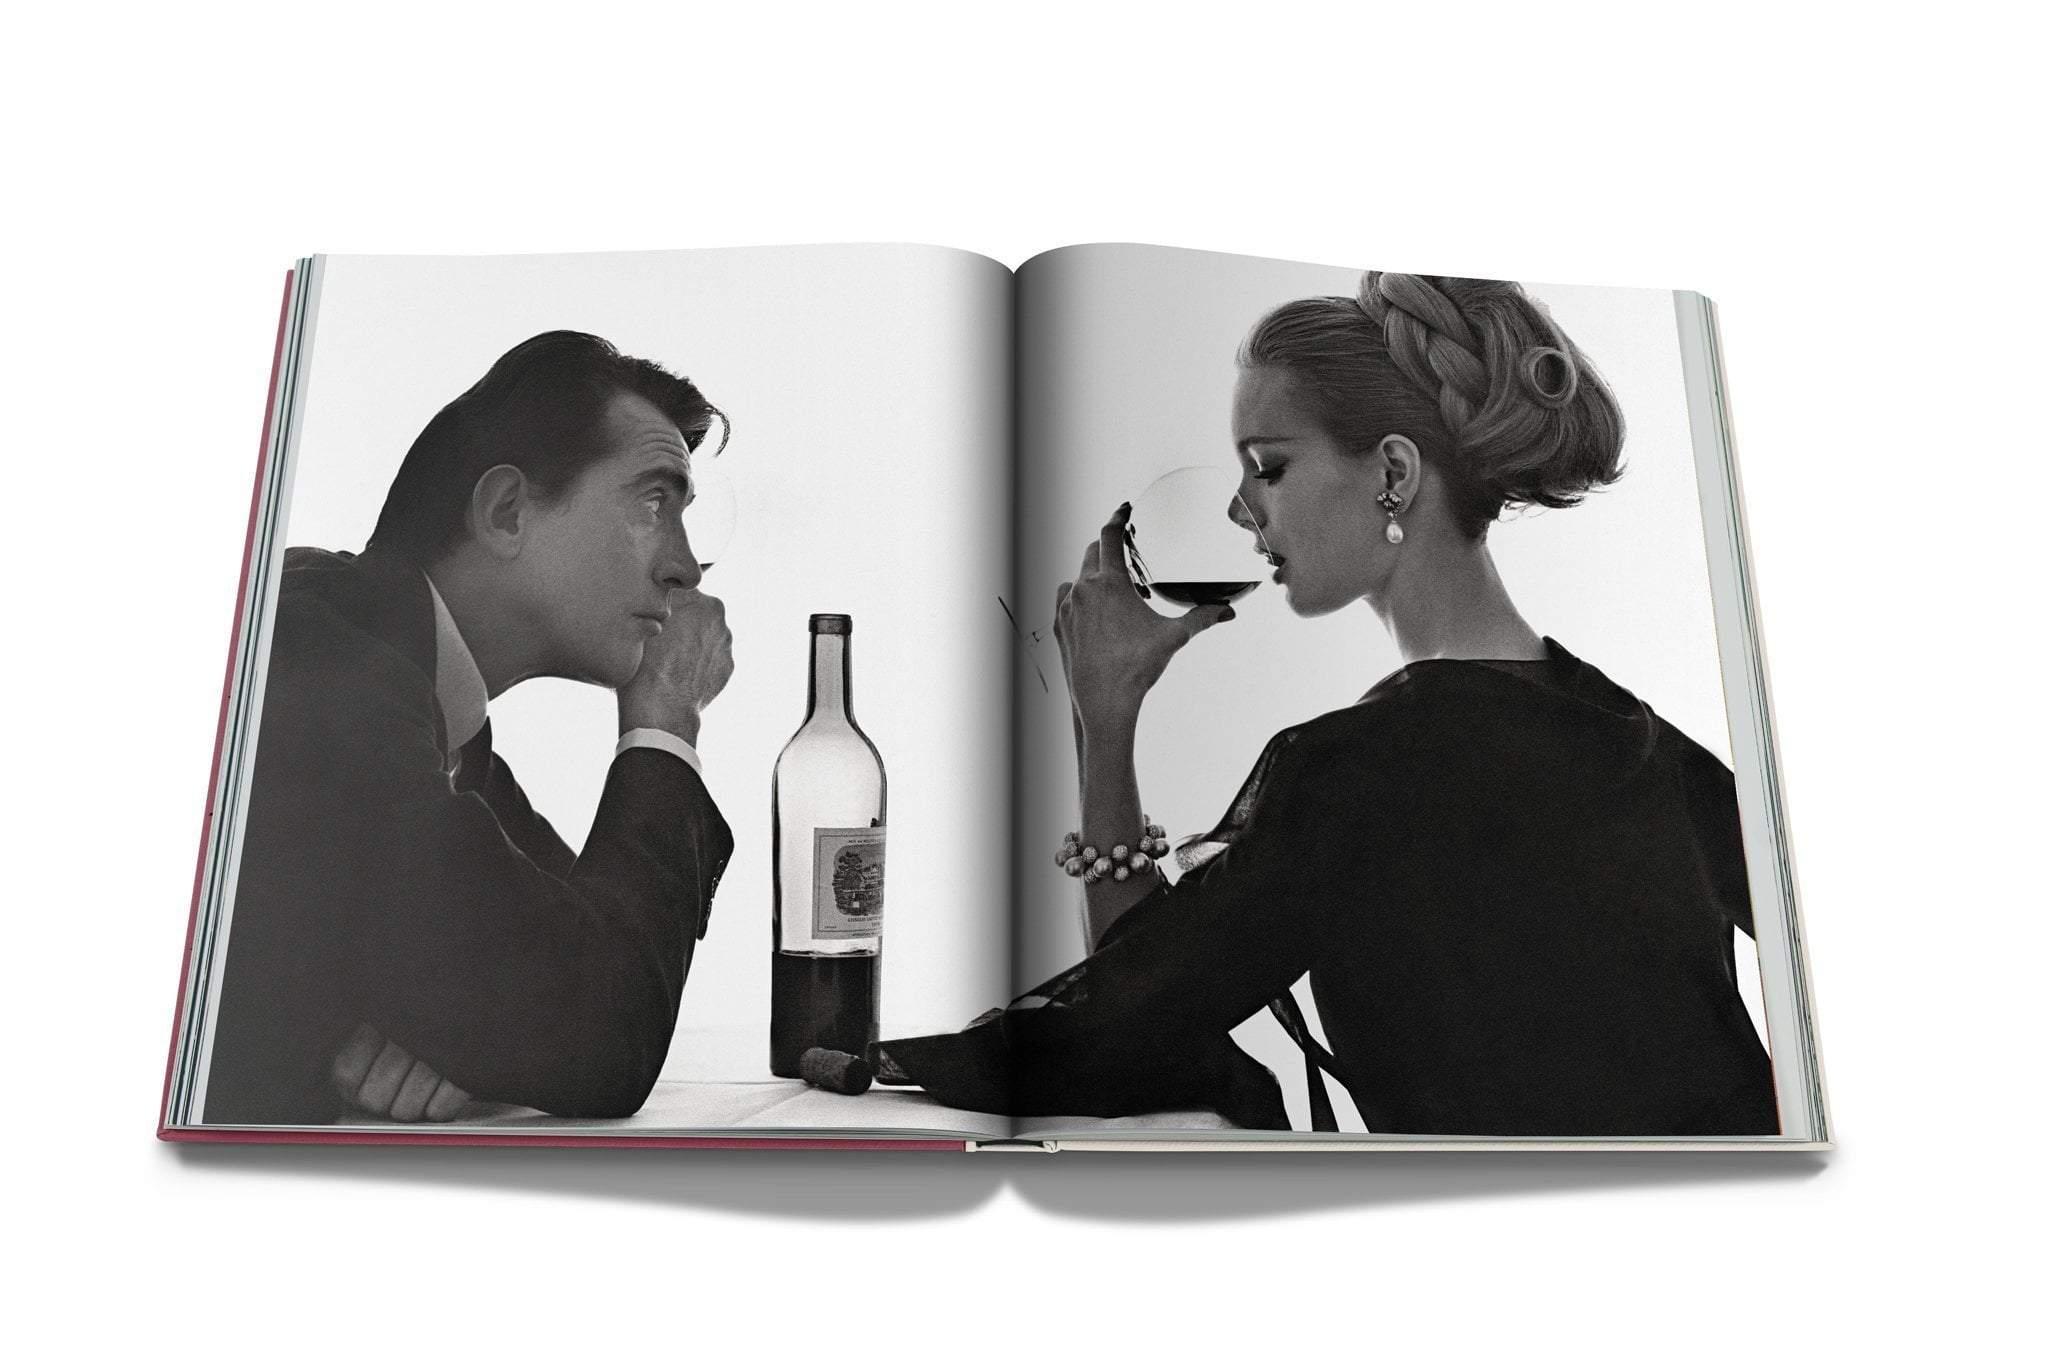 Assouline - The Impossible Collection of Wine - Coffee Table Book